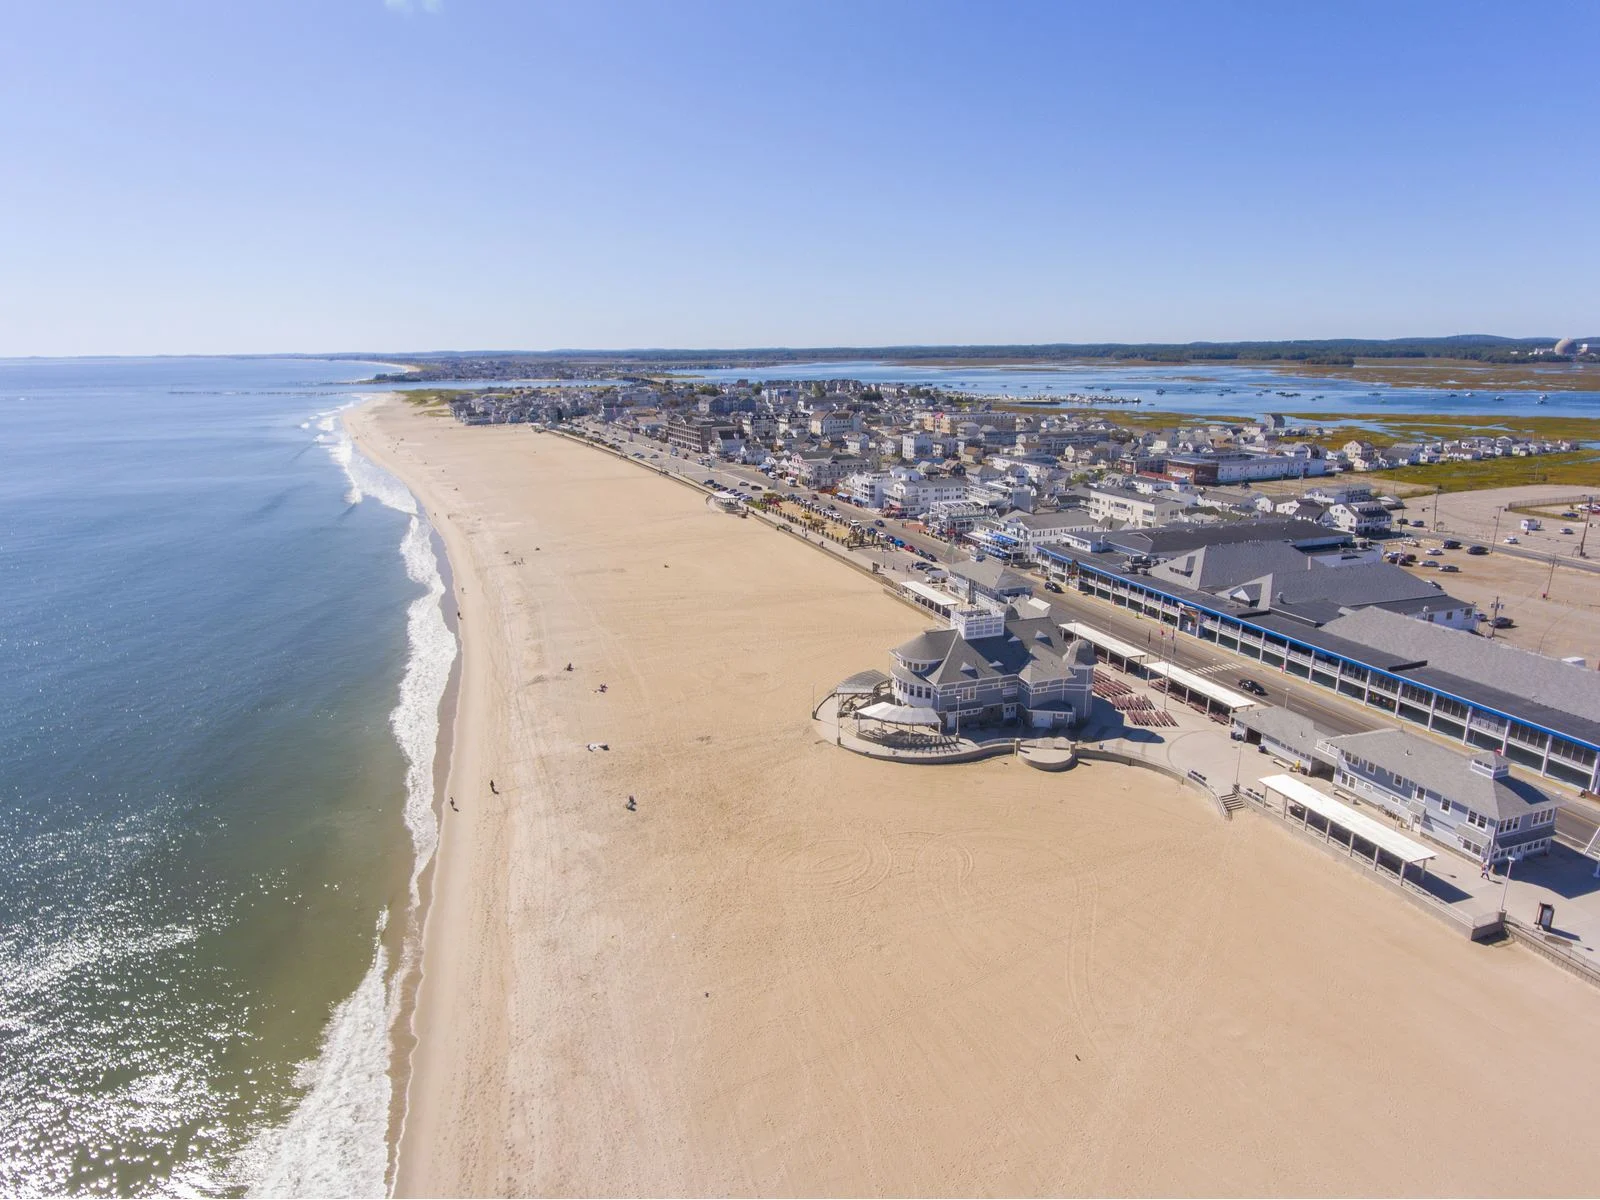 Clear wide coast at Hampton Beach in New Hampshire, titled as one of the best beaches on the East Coast, with a highway a little far offshore